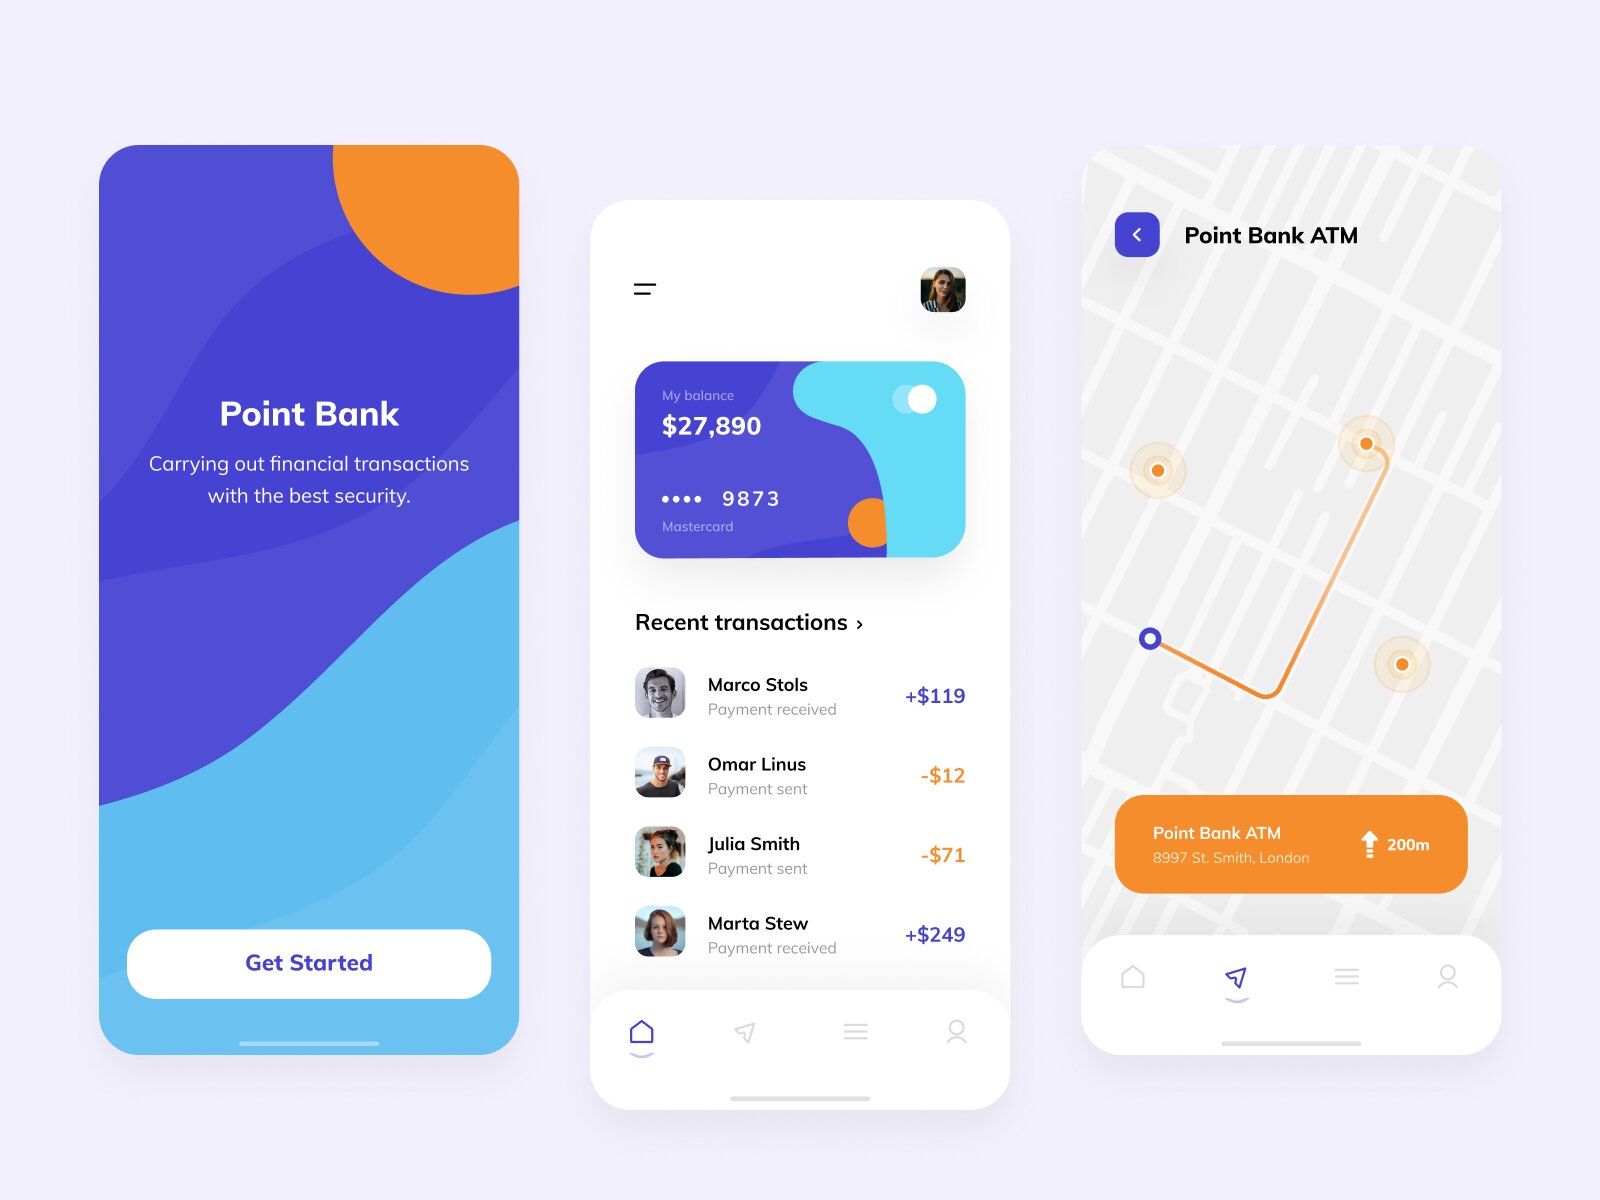 Developing a mobile banking software with ATM Network Location can be useful for your bank mobile application users (*image by [Gabriele Pala](https://dribbble.com/gabrielepala){ rel="nofollow" .default-md}*)